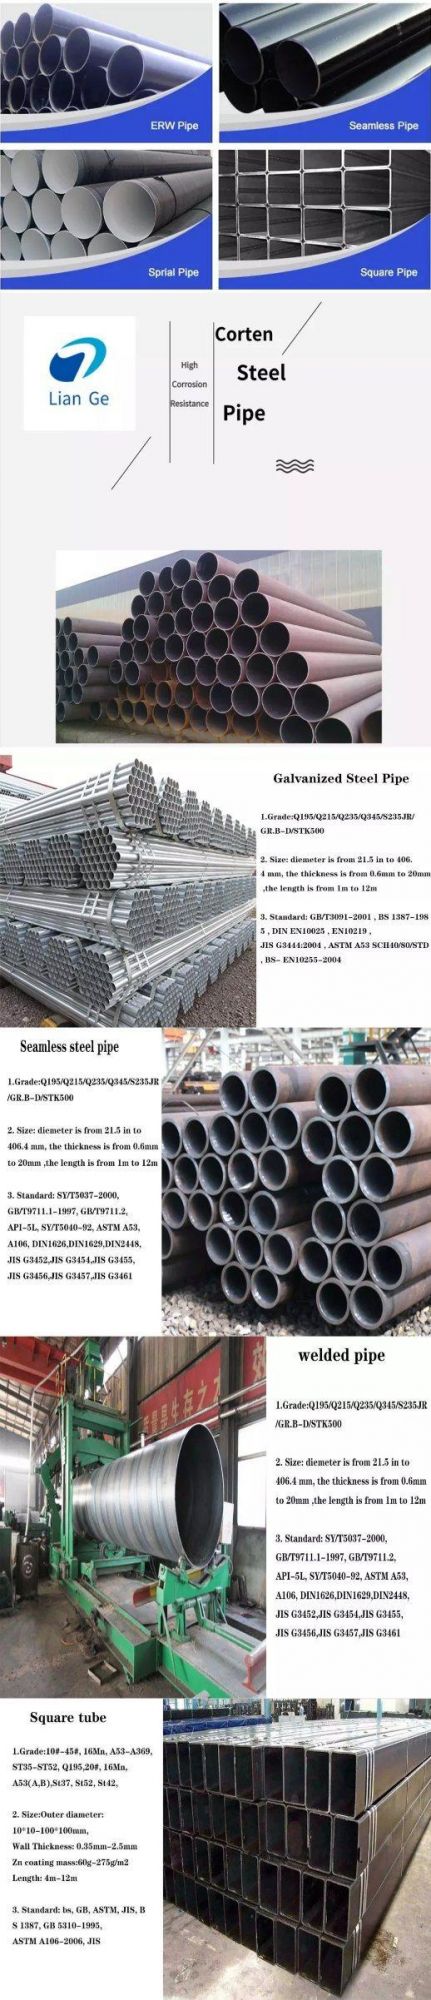 DIN 2448 St52 57mm SAE1020 Seamless Steel Pipe Tube